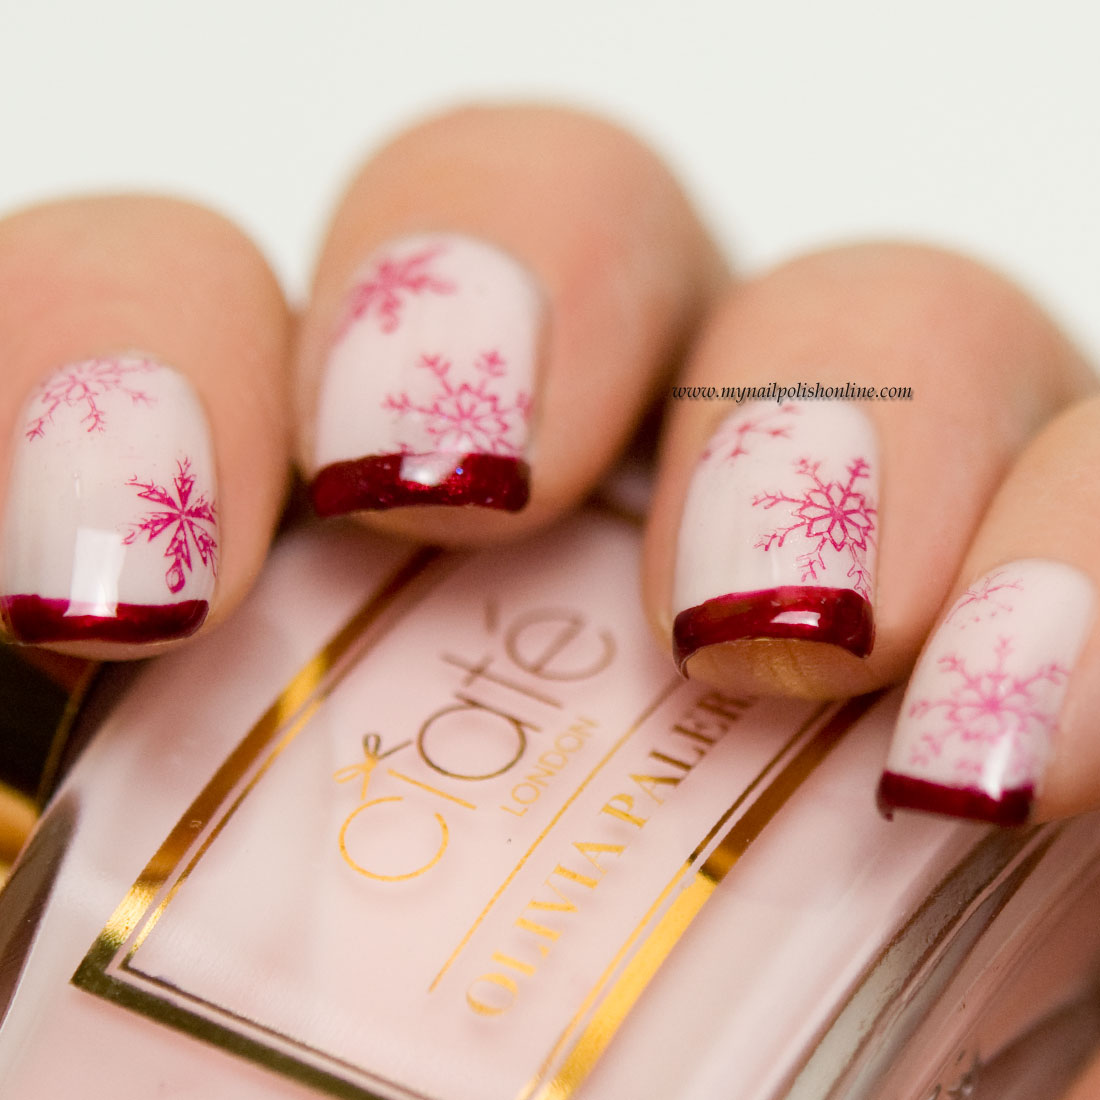 Stamping manicure with snowflakes - My Nail Polish Online